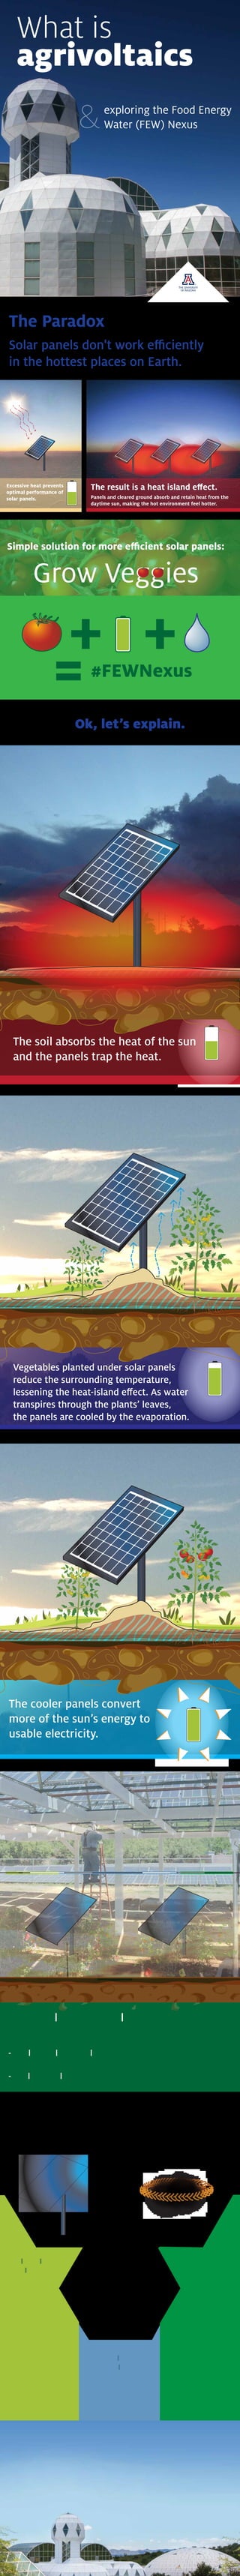 =
Excessive heat prevents
optimal performance of
solar panels. Panels and cleared ground absorb and retain heat from the
daytime sun, making the hot environment feel hotter.
The soil absorbs the heat of the sun
and the panels trap the heat.
Vegetables planted under solar panels
reduce the surrounding temperature,
transpires through the plants’ leaves,
the panels are cooled by the evaporation.
Grow Veggies
+ +
Ok, let’s explain.
in the hottest places on Earth.
The Paradox
Shaded plants require less water.
- Healthier plants are less prone to heat stress
- Cooled panels capture more energy
The cooler panels convert
more of the sun’s energy to
usable electricity.
Cooler solar
panels capture
more energy
from the sun.
Vegetable crops
share the
land with
solar panels.
Shaded plants
consume less water.
agrivoltaics
What is
exploring the Food Energy
Water (FEW) Nexus&
#FEWNexus
#Biosphere2
Research.arizona.edu/stories/agrivoltaics
#FEWNexus
 